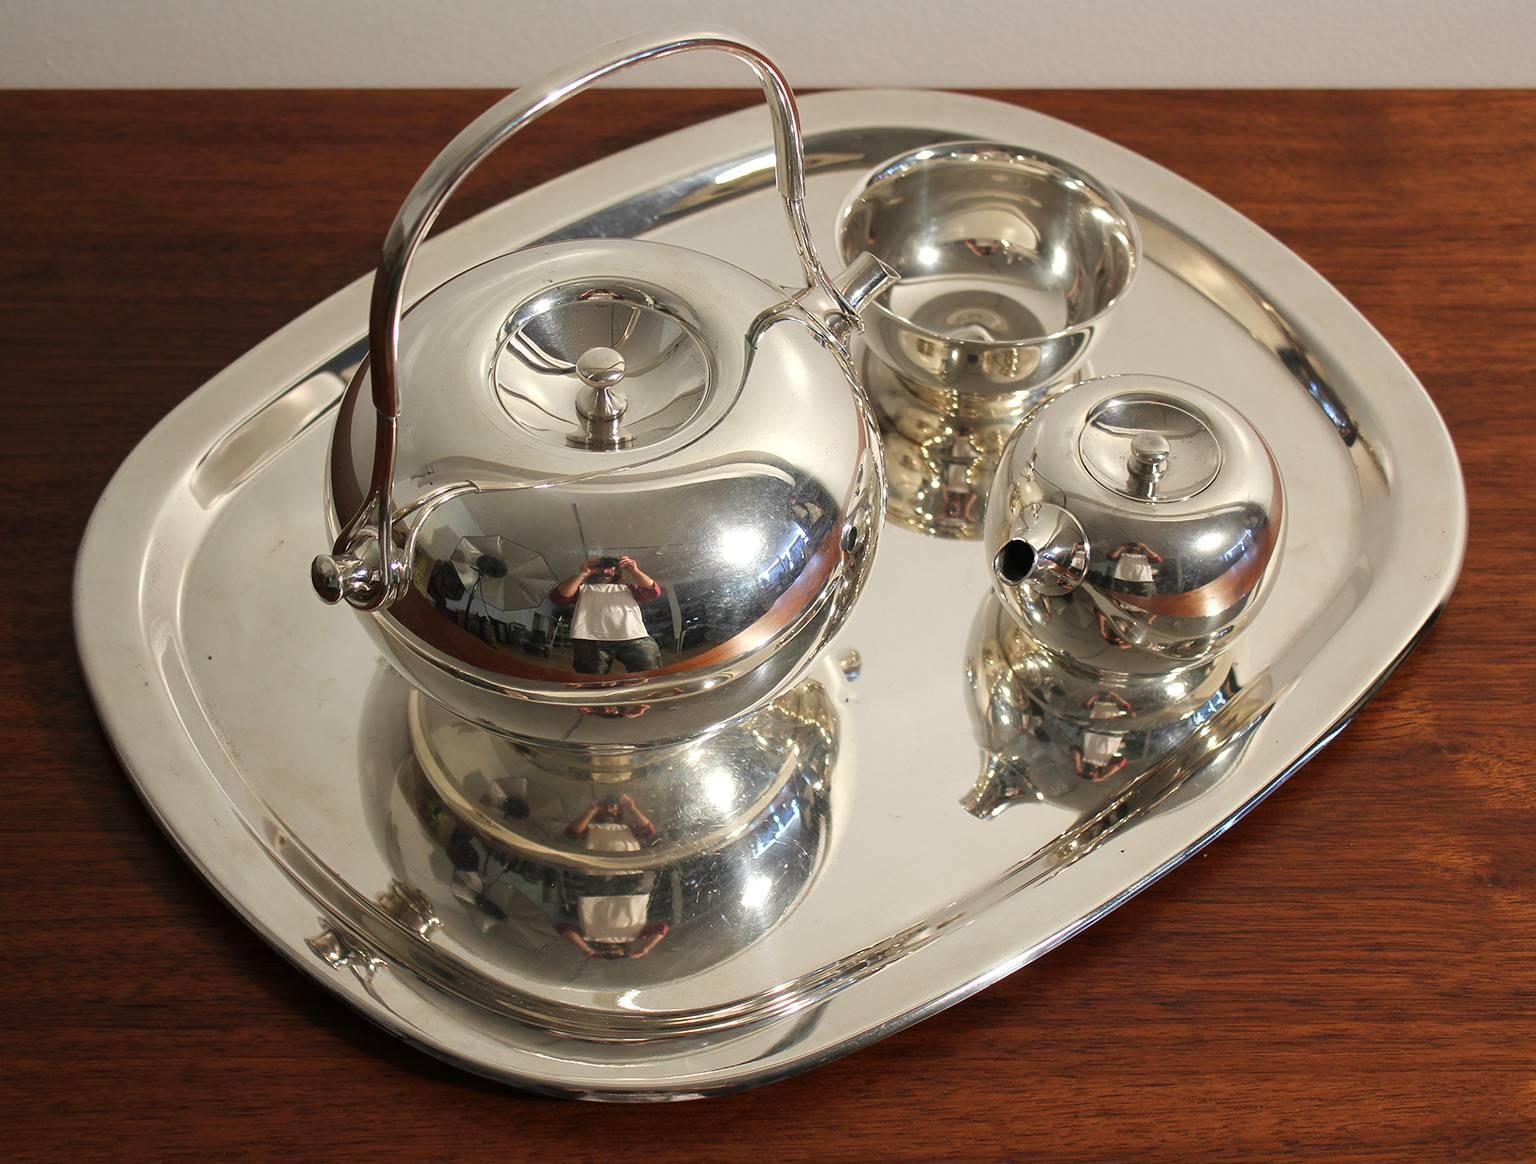 Beautiful modernist Dansk silver plate tea set designed by Vivianna Torun, circa 1960s. Comes with the tea pot, tray, creamer and sugar. Very rare to find complete. In excellent shape with no dents and the silver plate is in great shape.